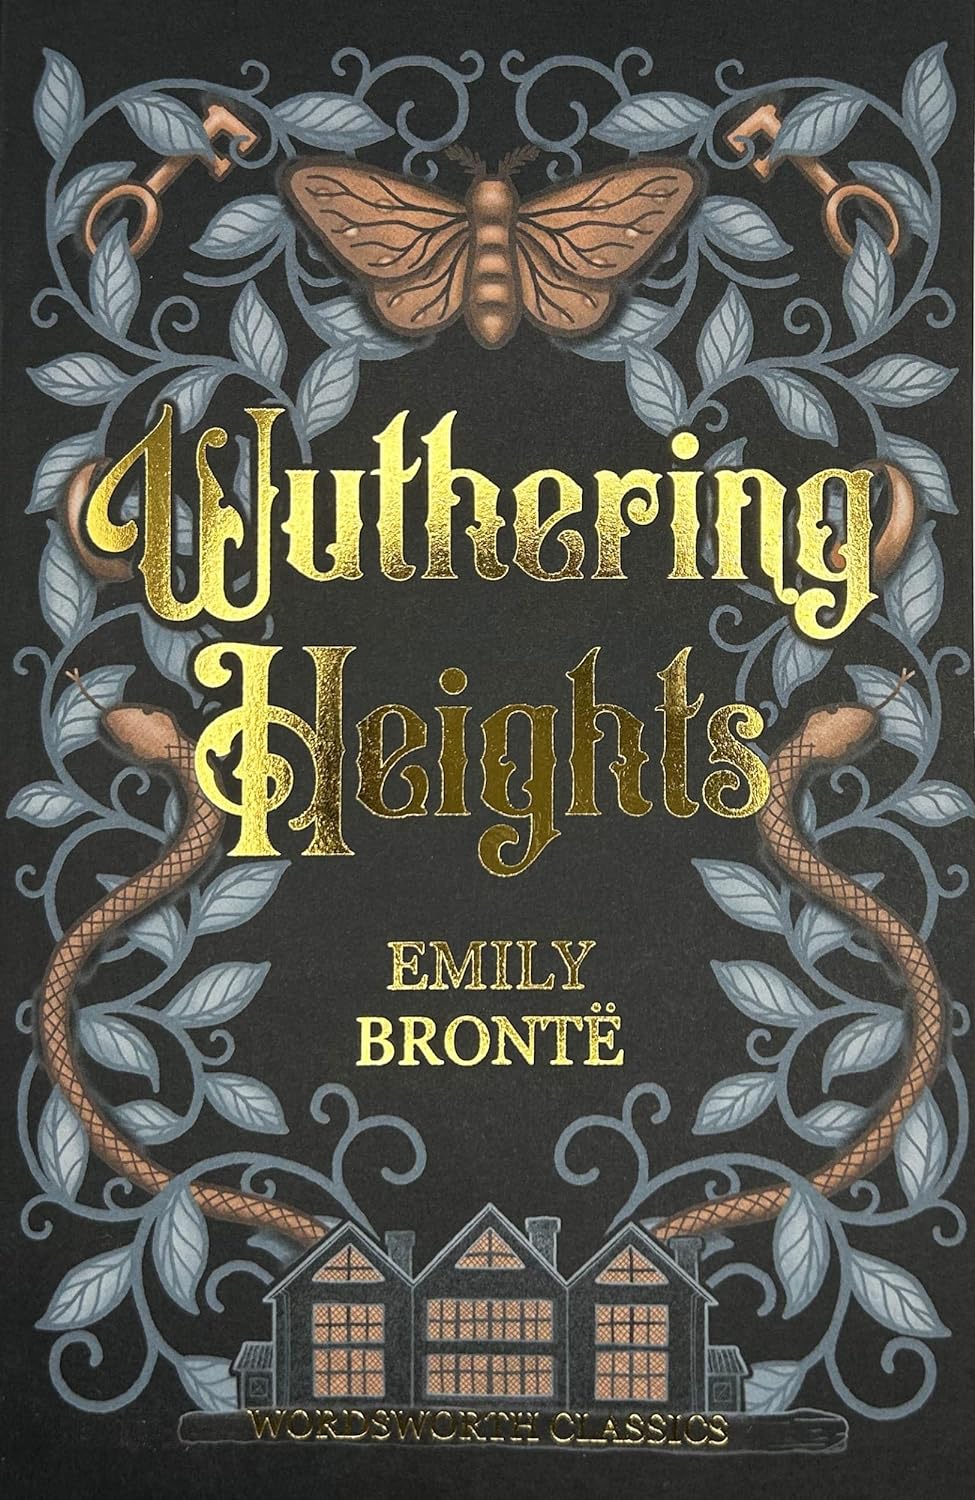 Wuthering Heights by Emily Brontë (1847)